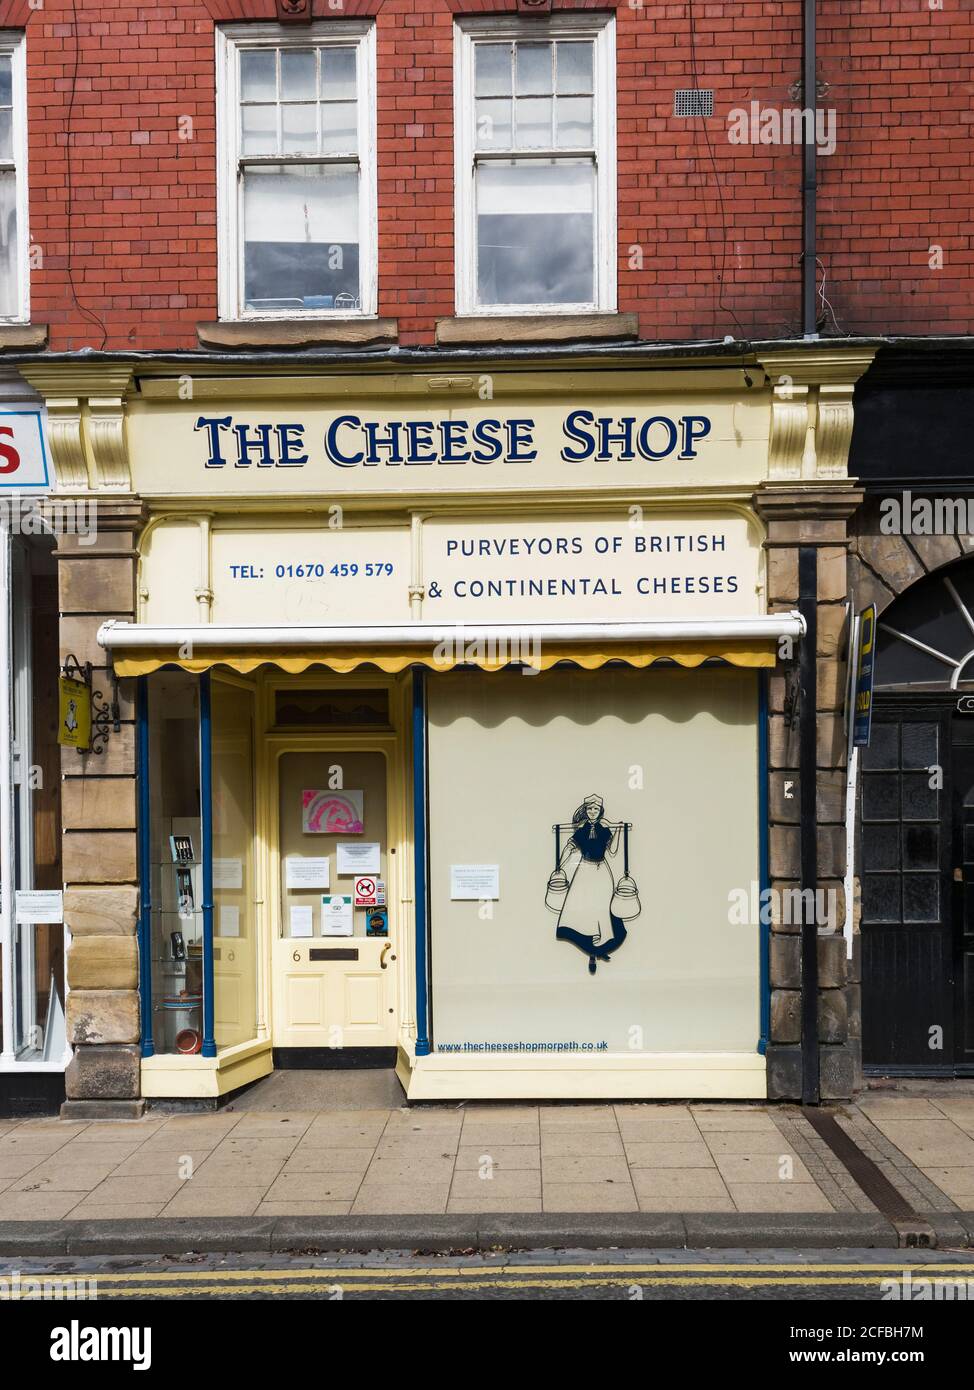 Cheese shop at Morpeth, Northumberland, UK displaying coronavirus restriction measures. Restrictions to combat the pandemic have hit small businesses. Stock Photo